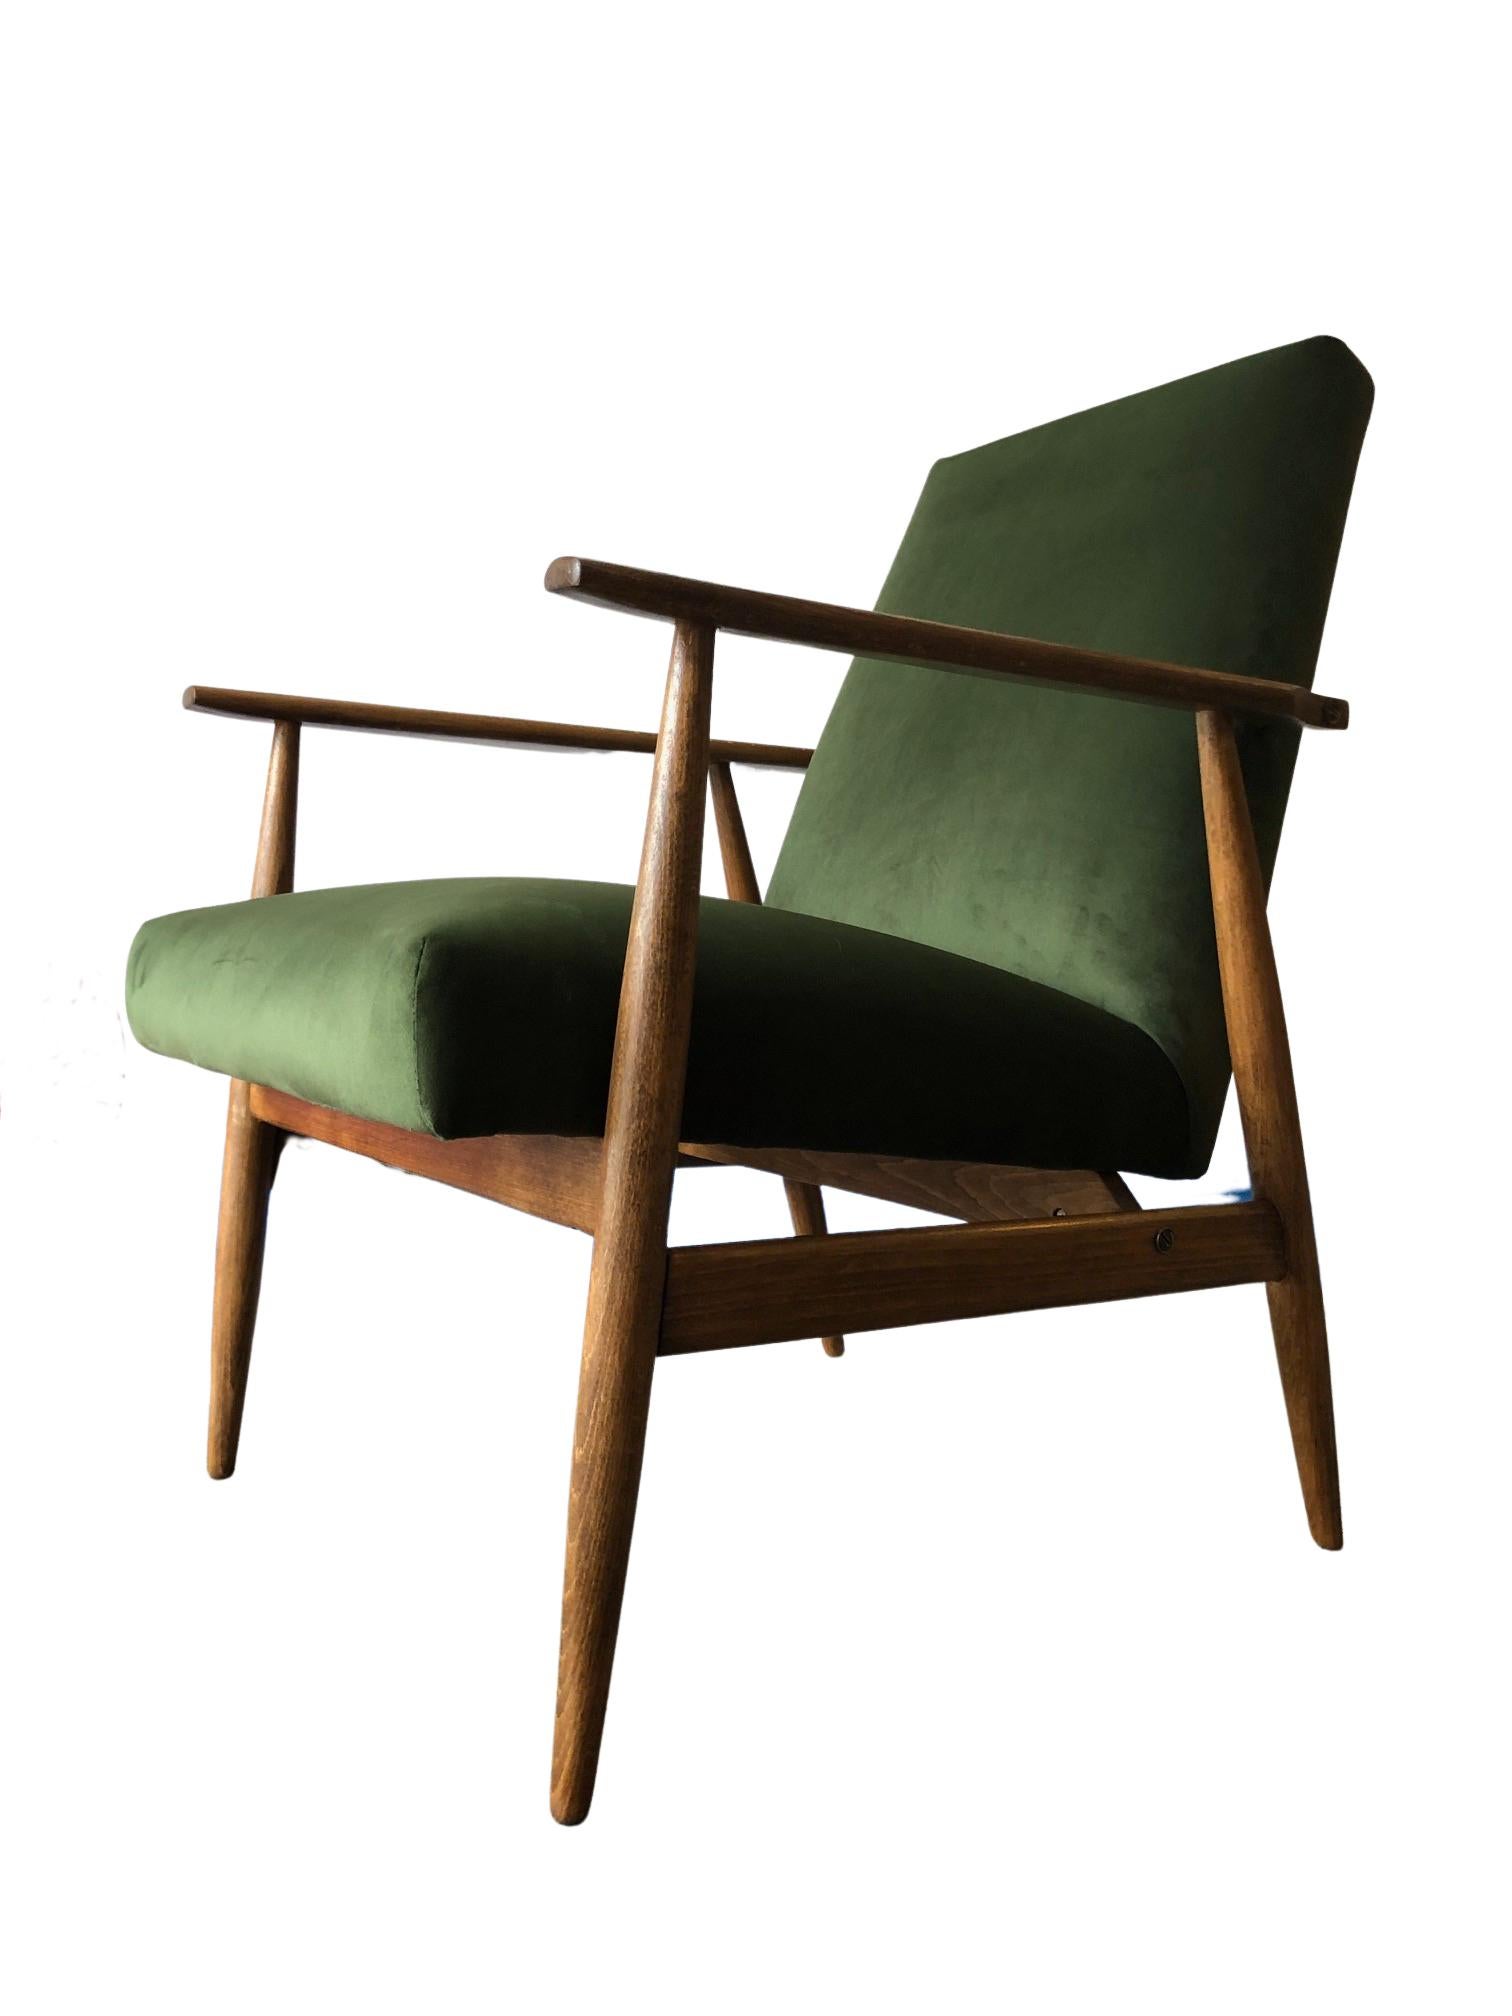 The armchair designed by Henryk Lis. The structure is made of beech wood in a warm walnut color, finished with a semi-matte satin varnish. The upholstery is high quality velvet in a beautiful green color. The armchair has been completely restored -